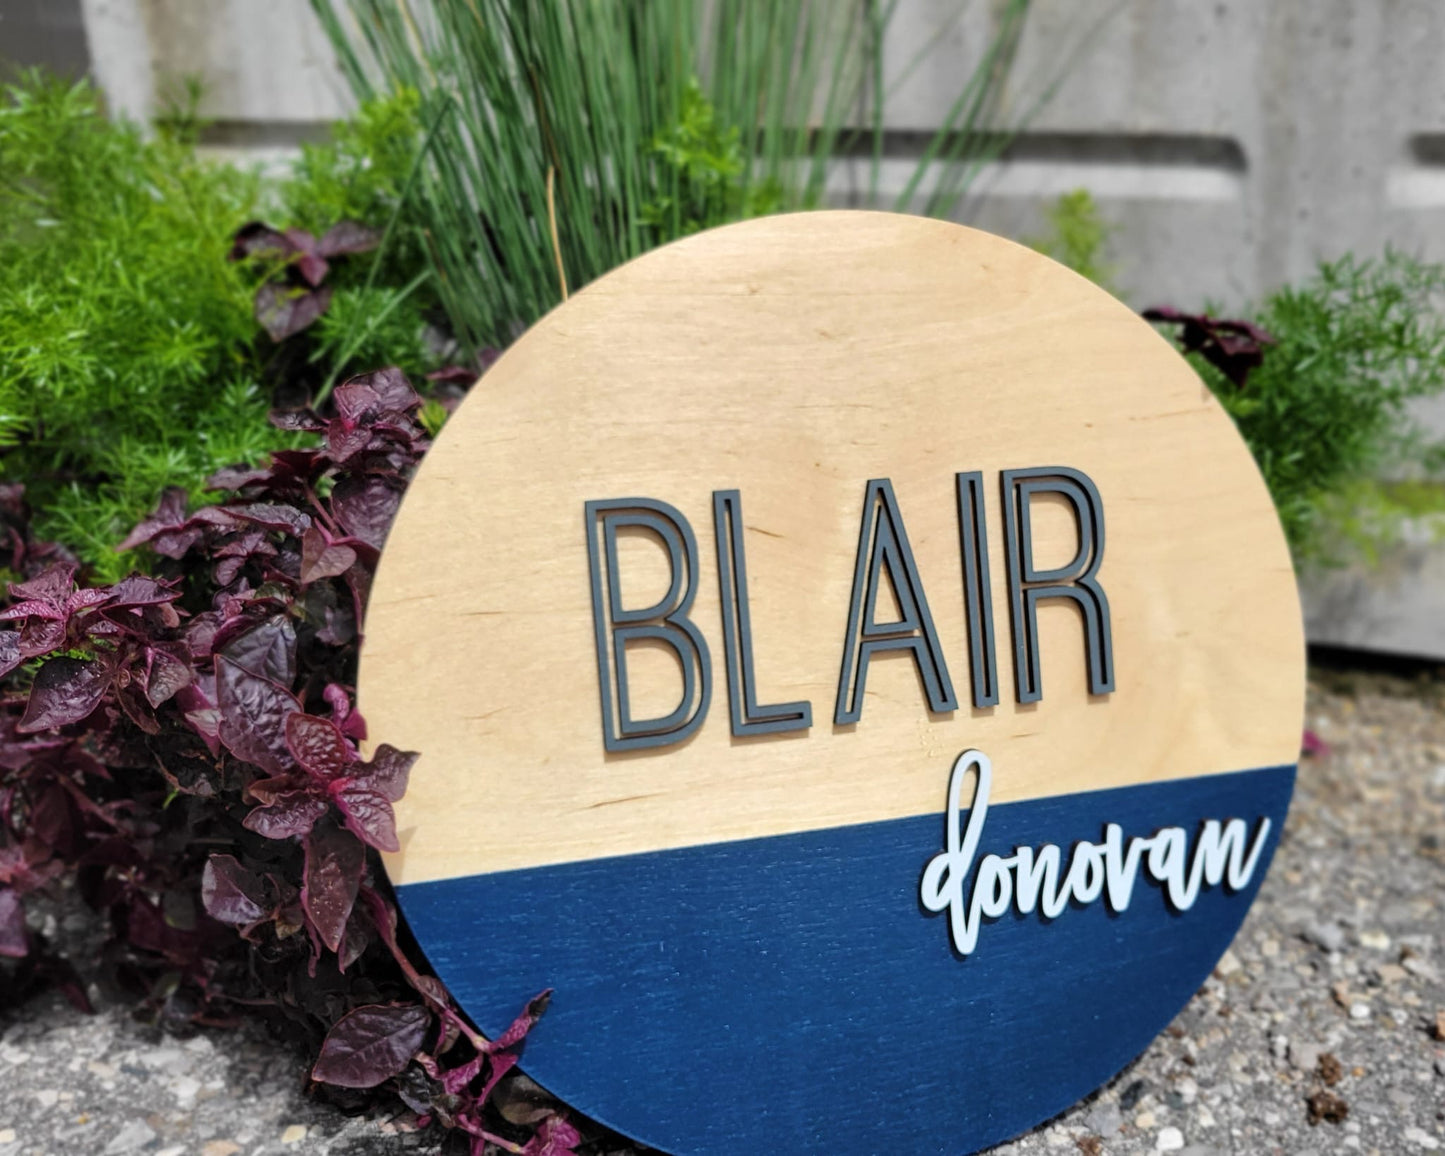 NAME ROUND SIGN- "HALF DIPPED" DESIGN